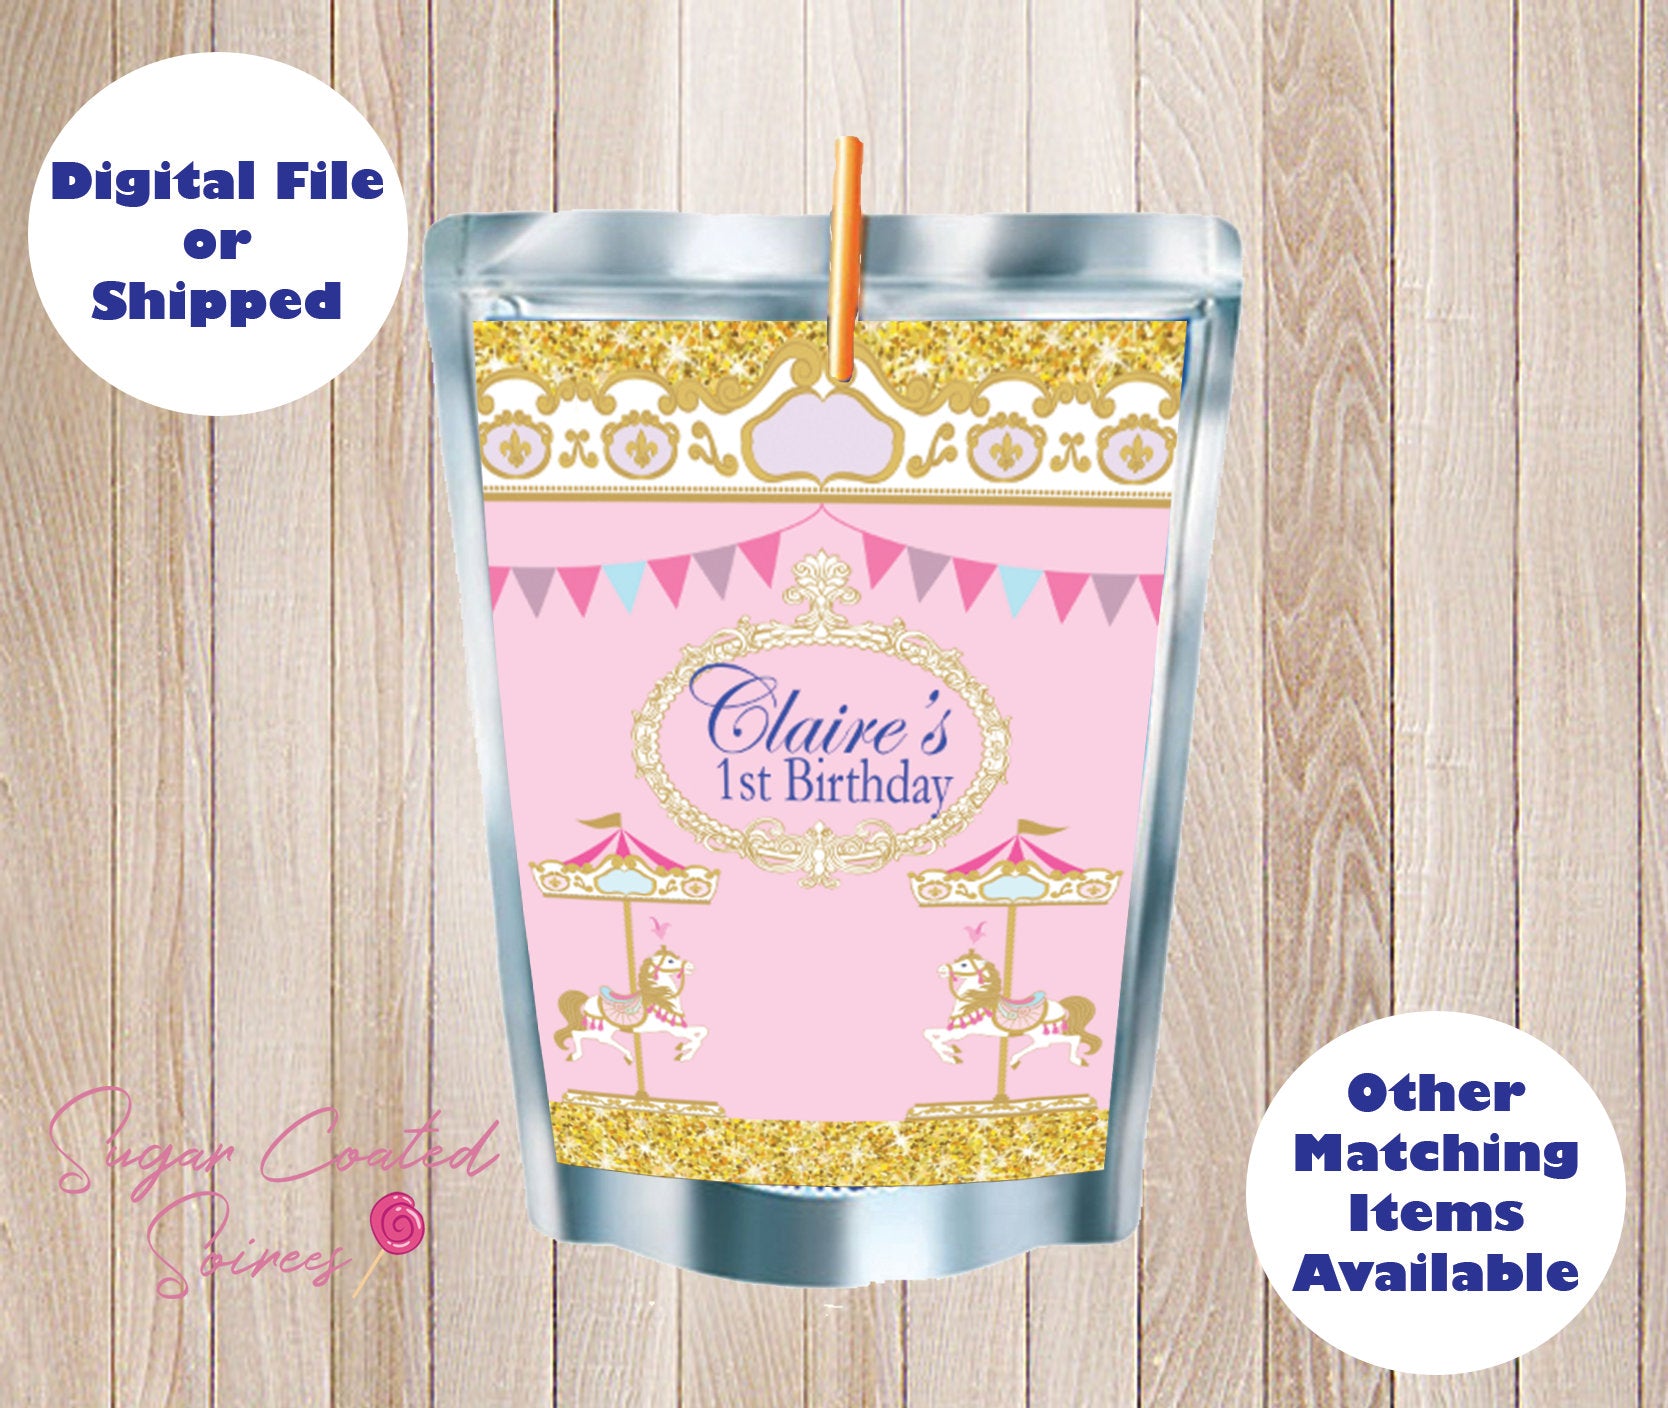 PRINTED and SHIPPED Pink Carousel  first birthday, Girls Party Personalized Capri Sun Juice Pouch Label, Birthday Party, Favor, DIY